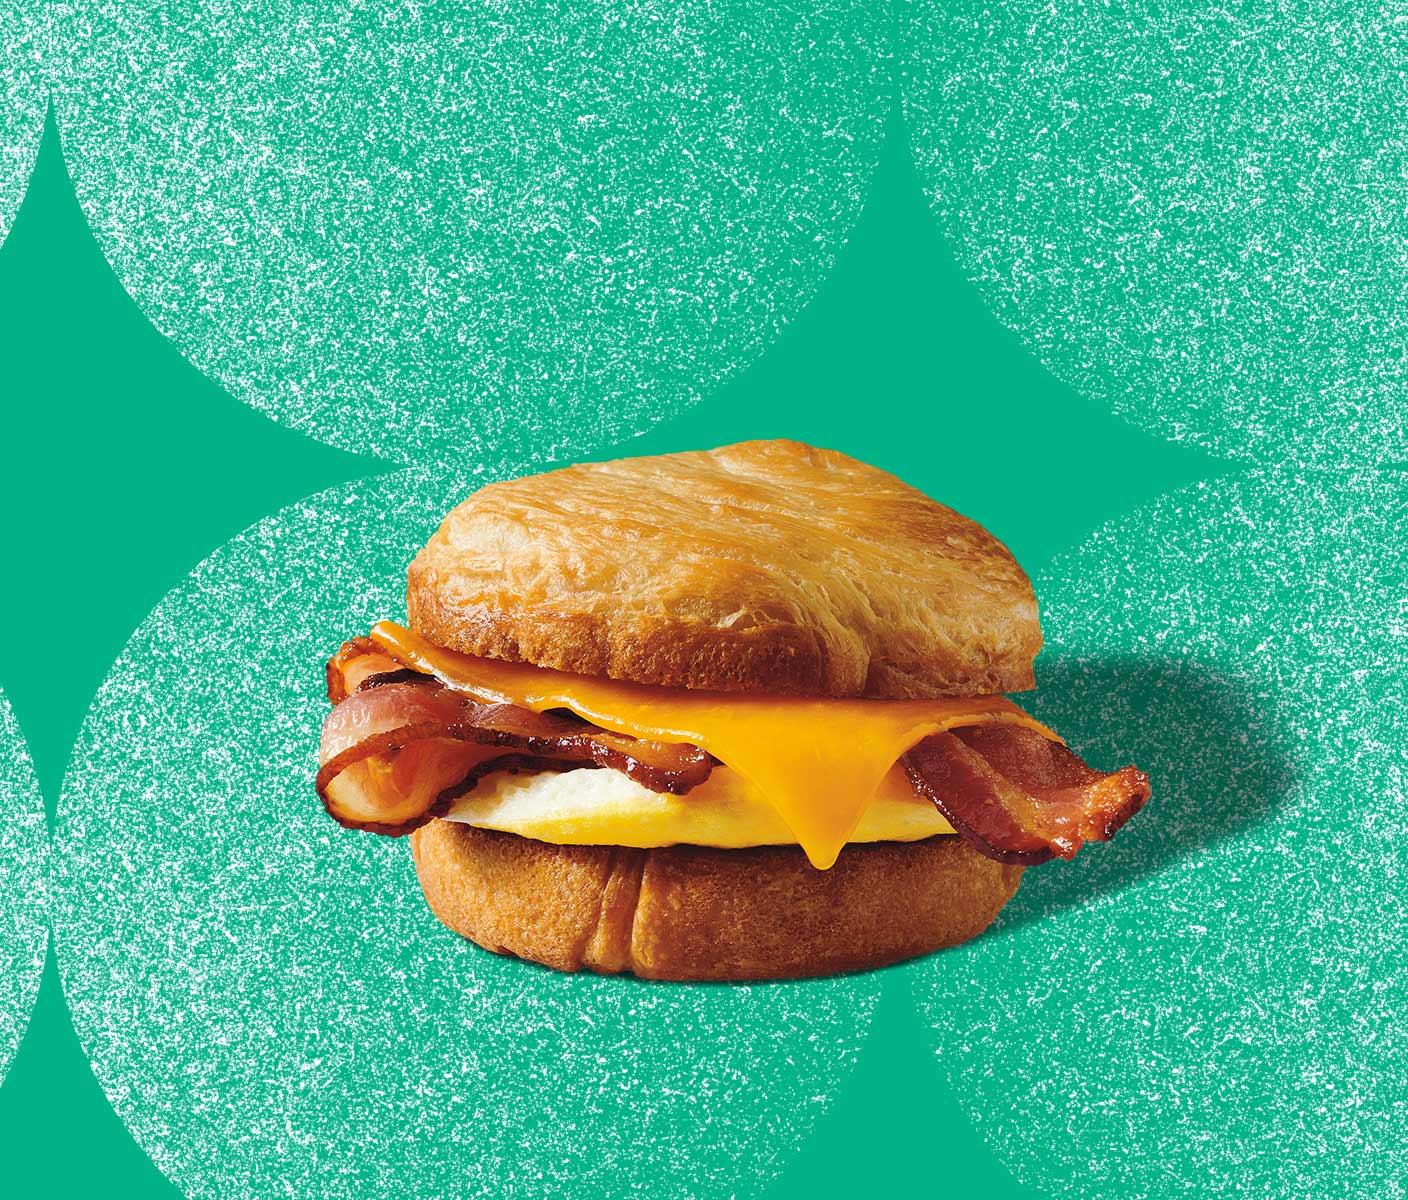 Bacon strips, melted cheese and a fried egg layered in a round croissant-style bun.